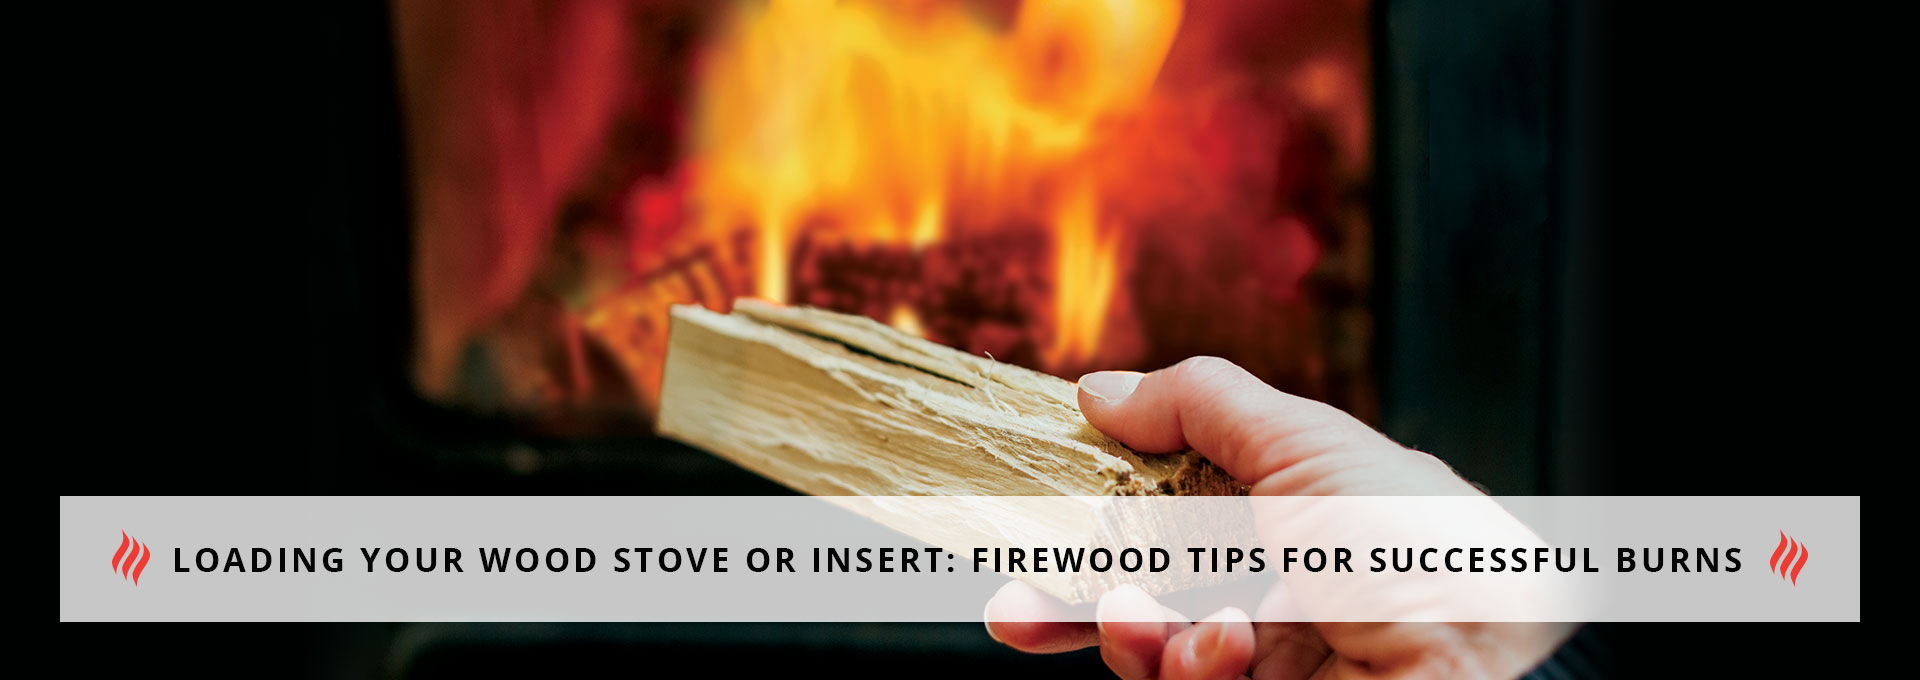 Loading Your Wood Stove or Insert: Firewood Tips for Successful Burns 